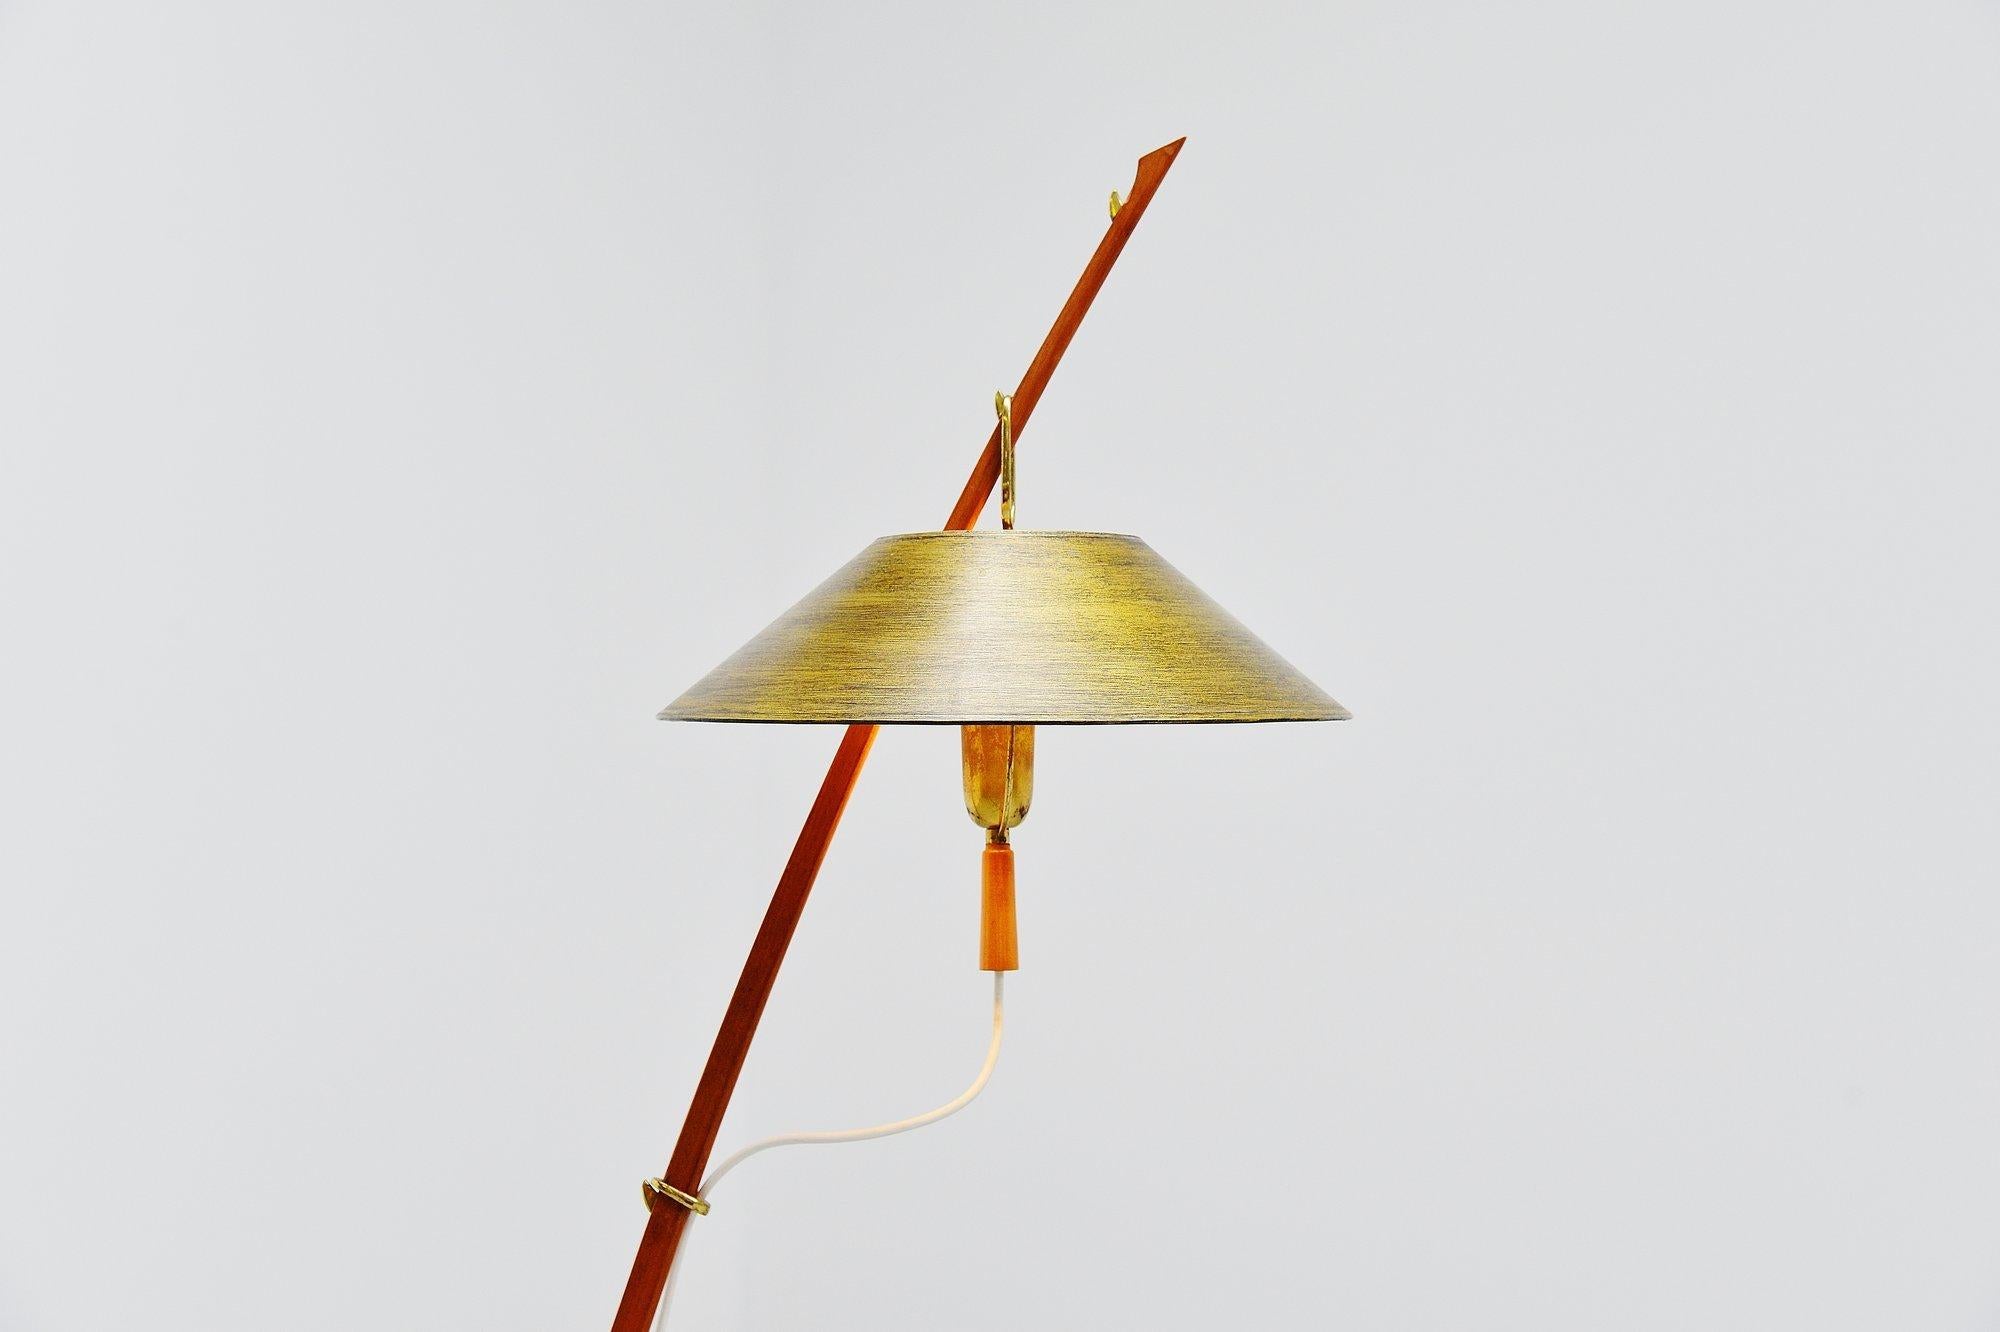 Very nice shaped floor lamp by J.T. Kalmar and manufactured by Kalmar, Austria 1950. This floor lamp has a teak frame and brass foot, it has a gold colored paper shade which is adjustable in height. The lamp is in excellent original condition. Lamp